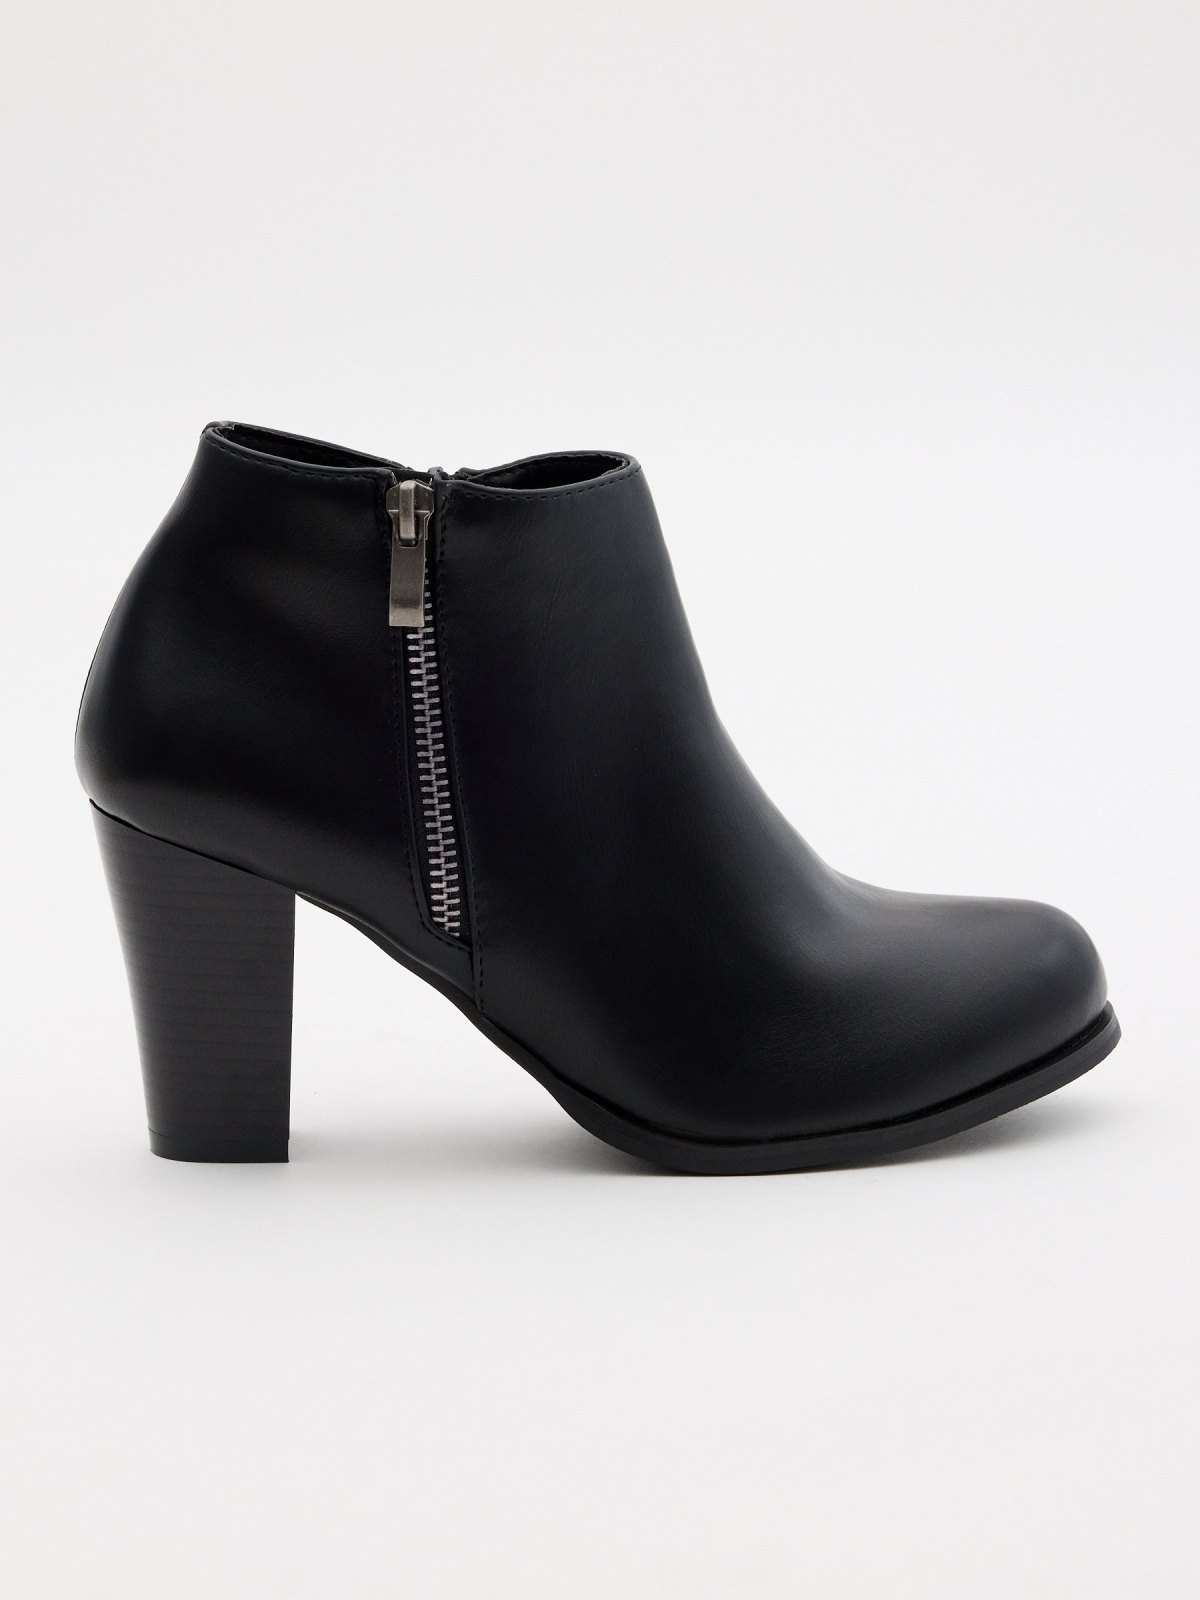 Basic black ankle boot with zipper black